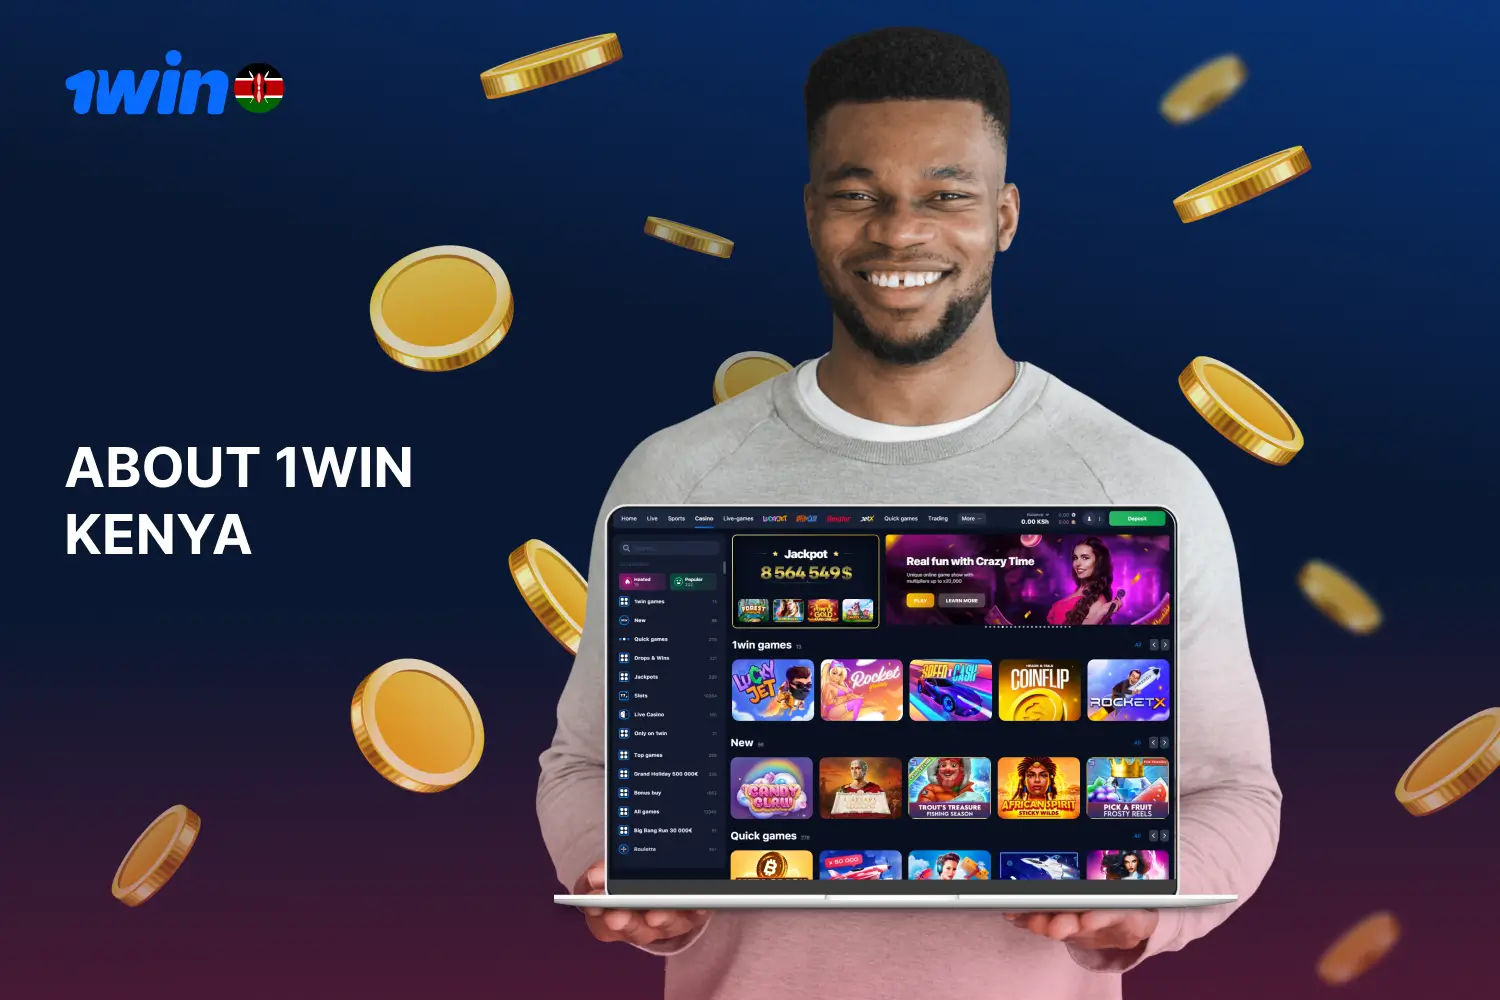 One of the largest bookmakers in Kenya 1win provides safe sports betting and a variety of bonuses for users